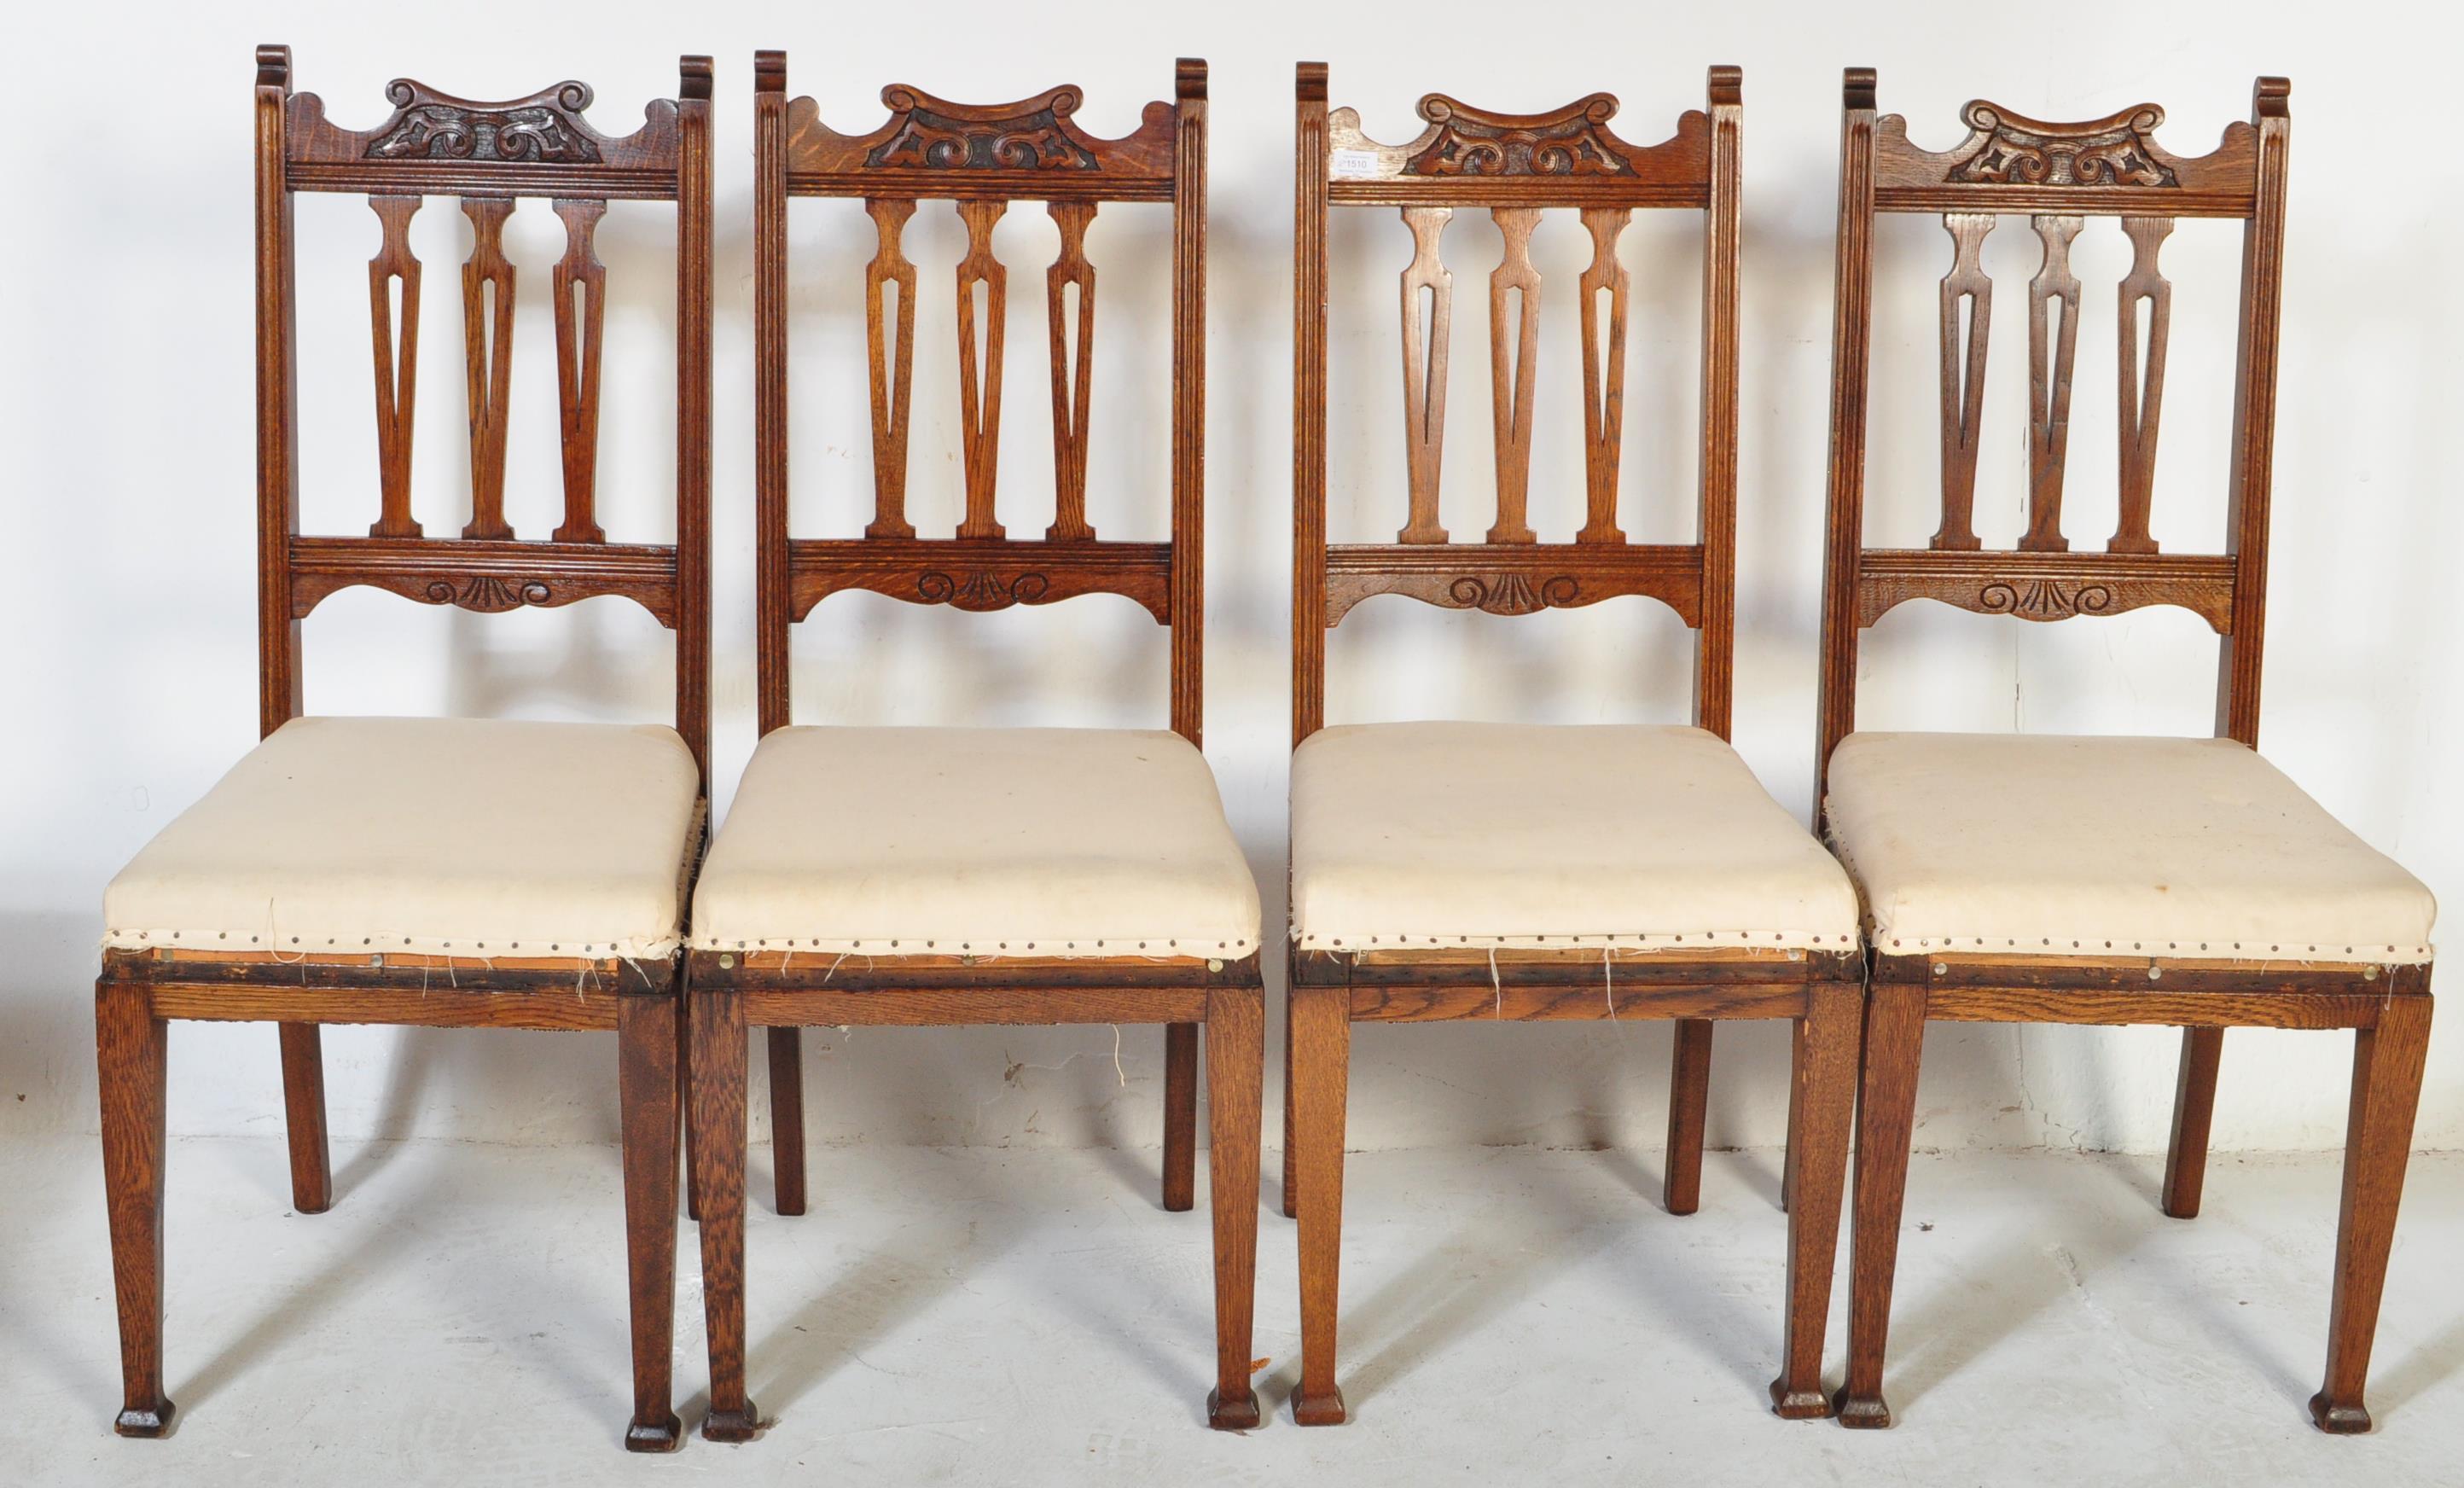 4 VICTORIAN 19TH CENTURY ARTS & CRAFTS OAK DINING CHAIRS - Image 2 of 5